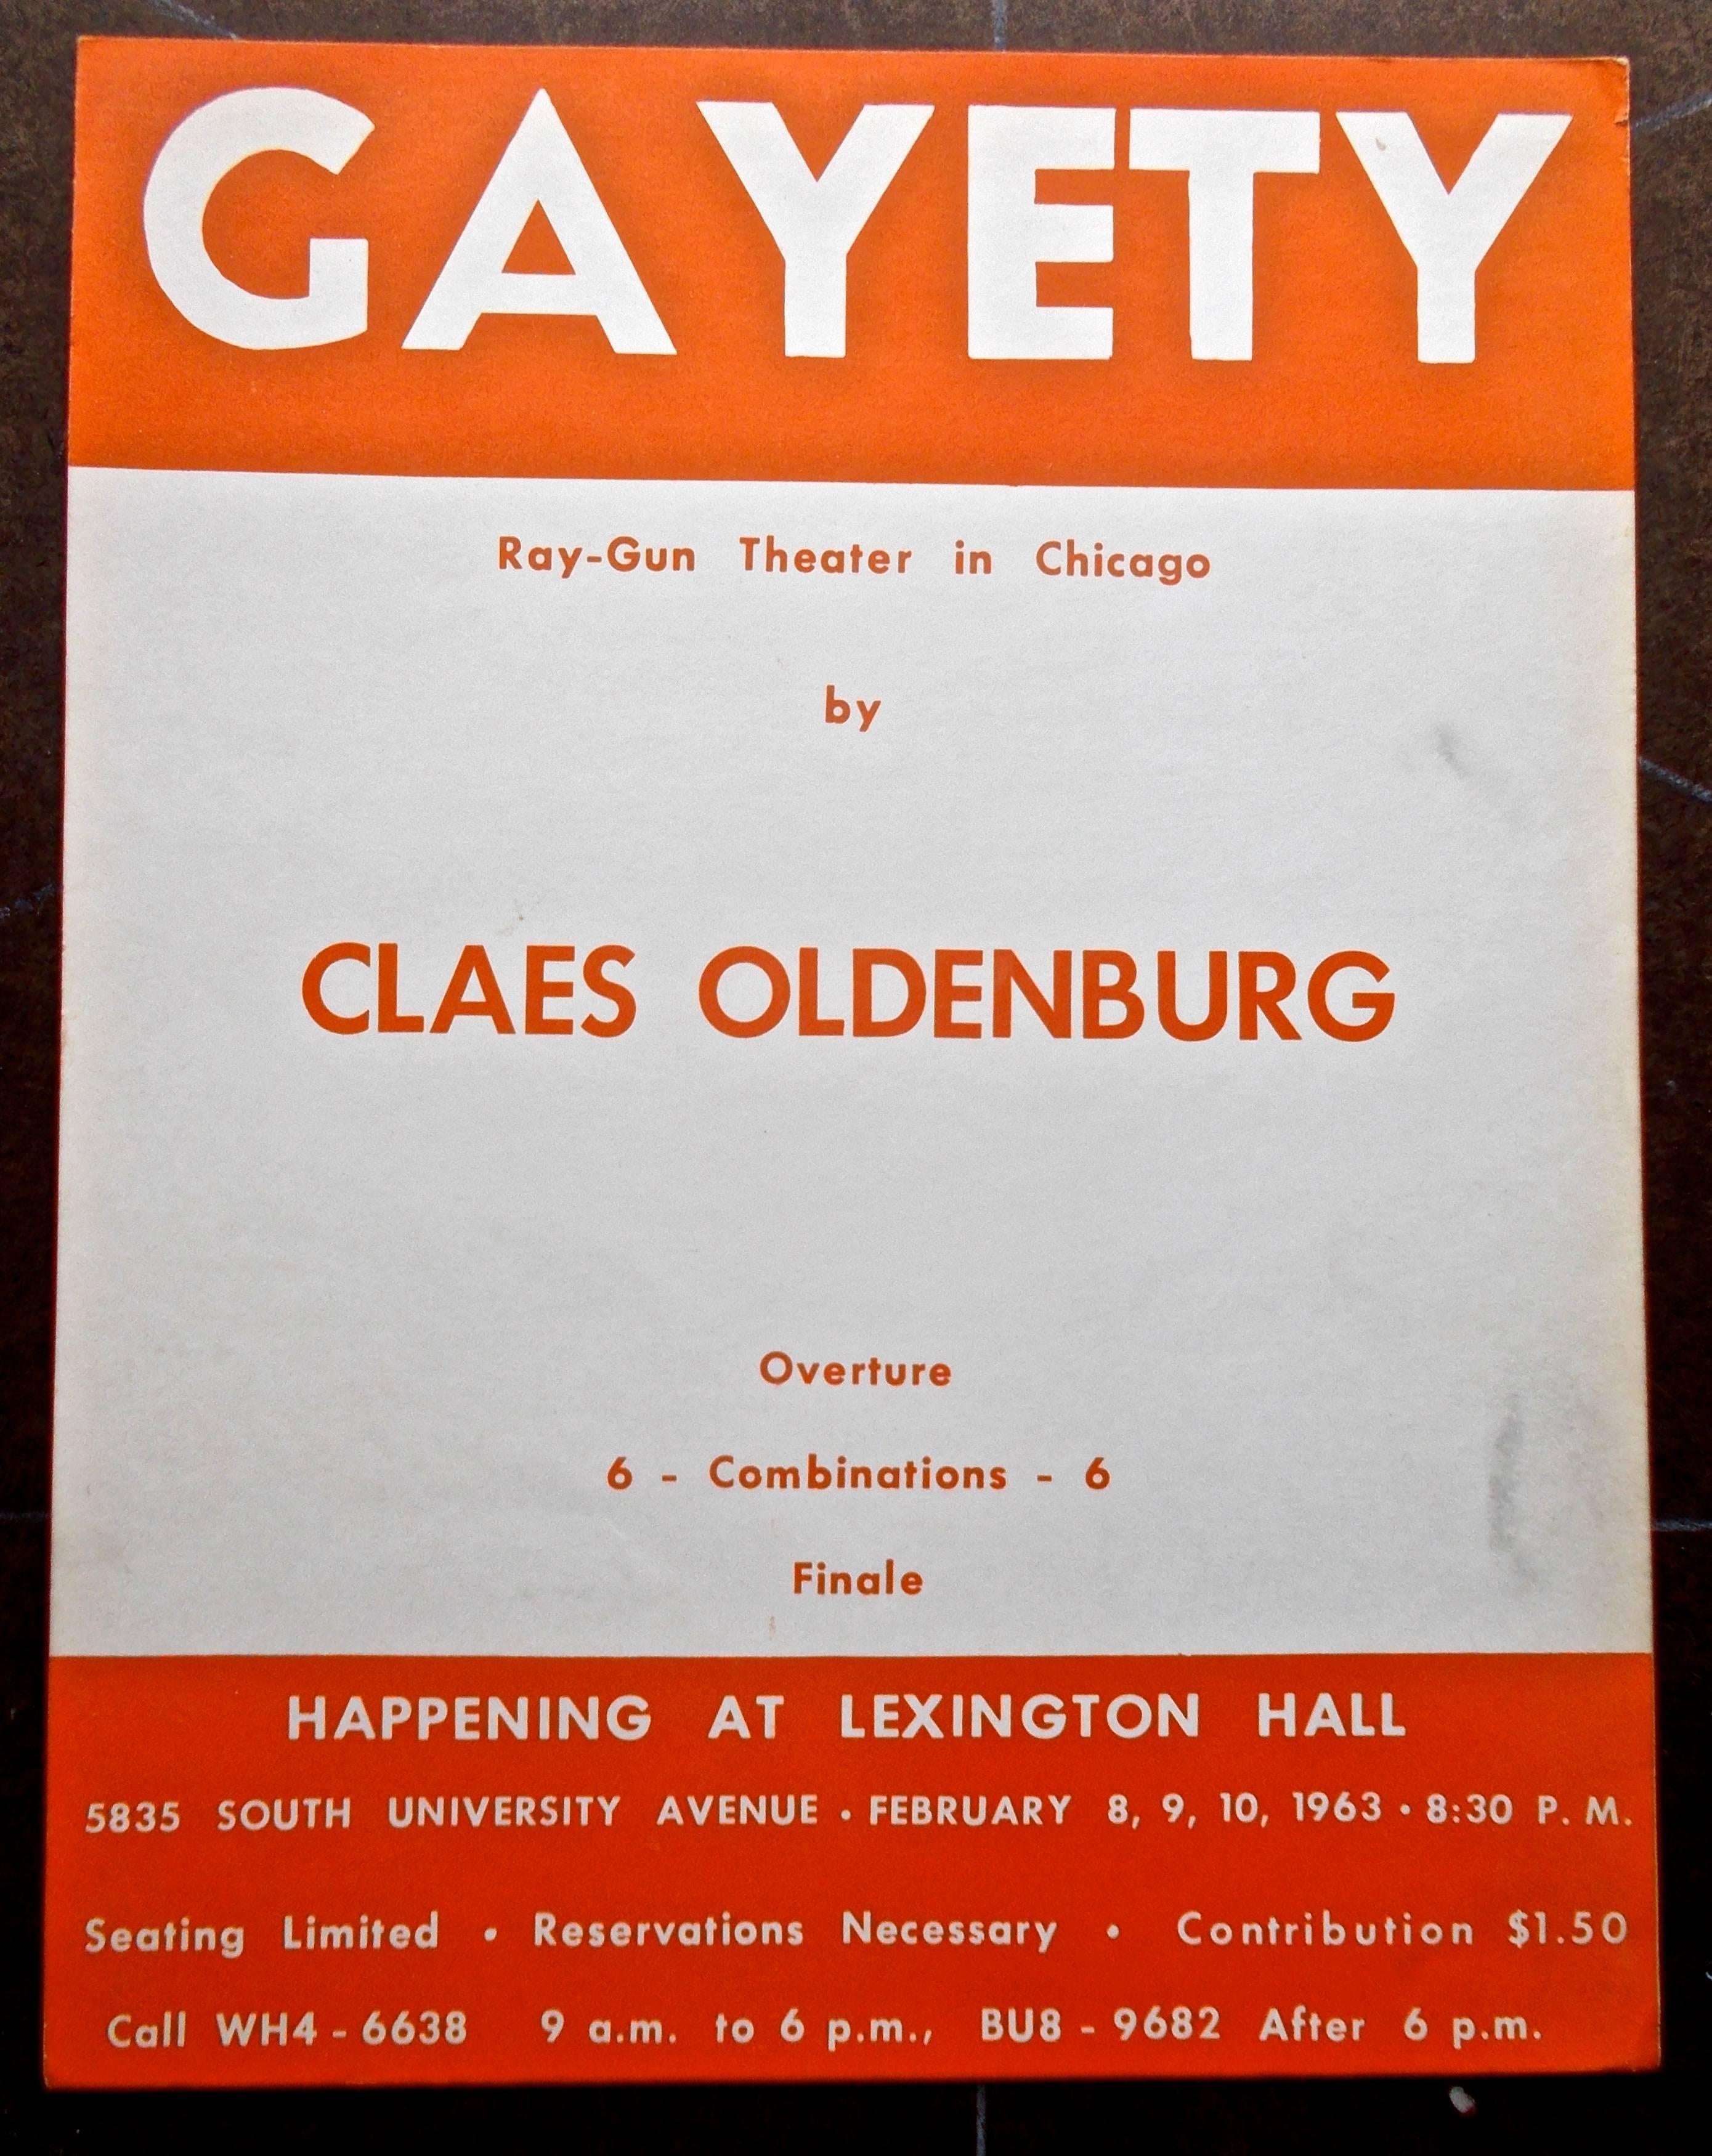 One of the original ephemeral Pop Art events of the 1960s, Claes Oldenburg's 